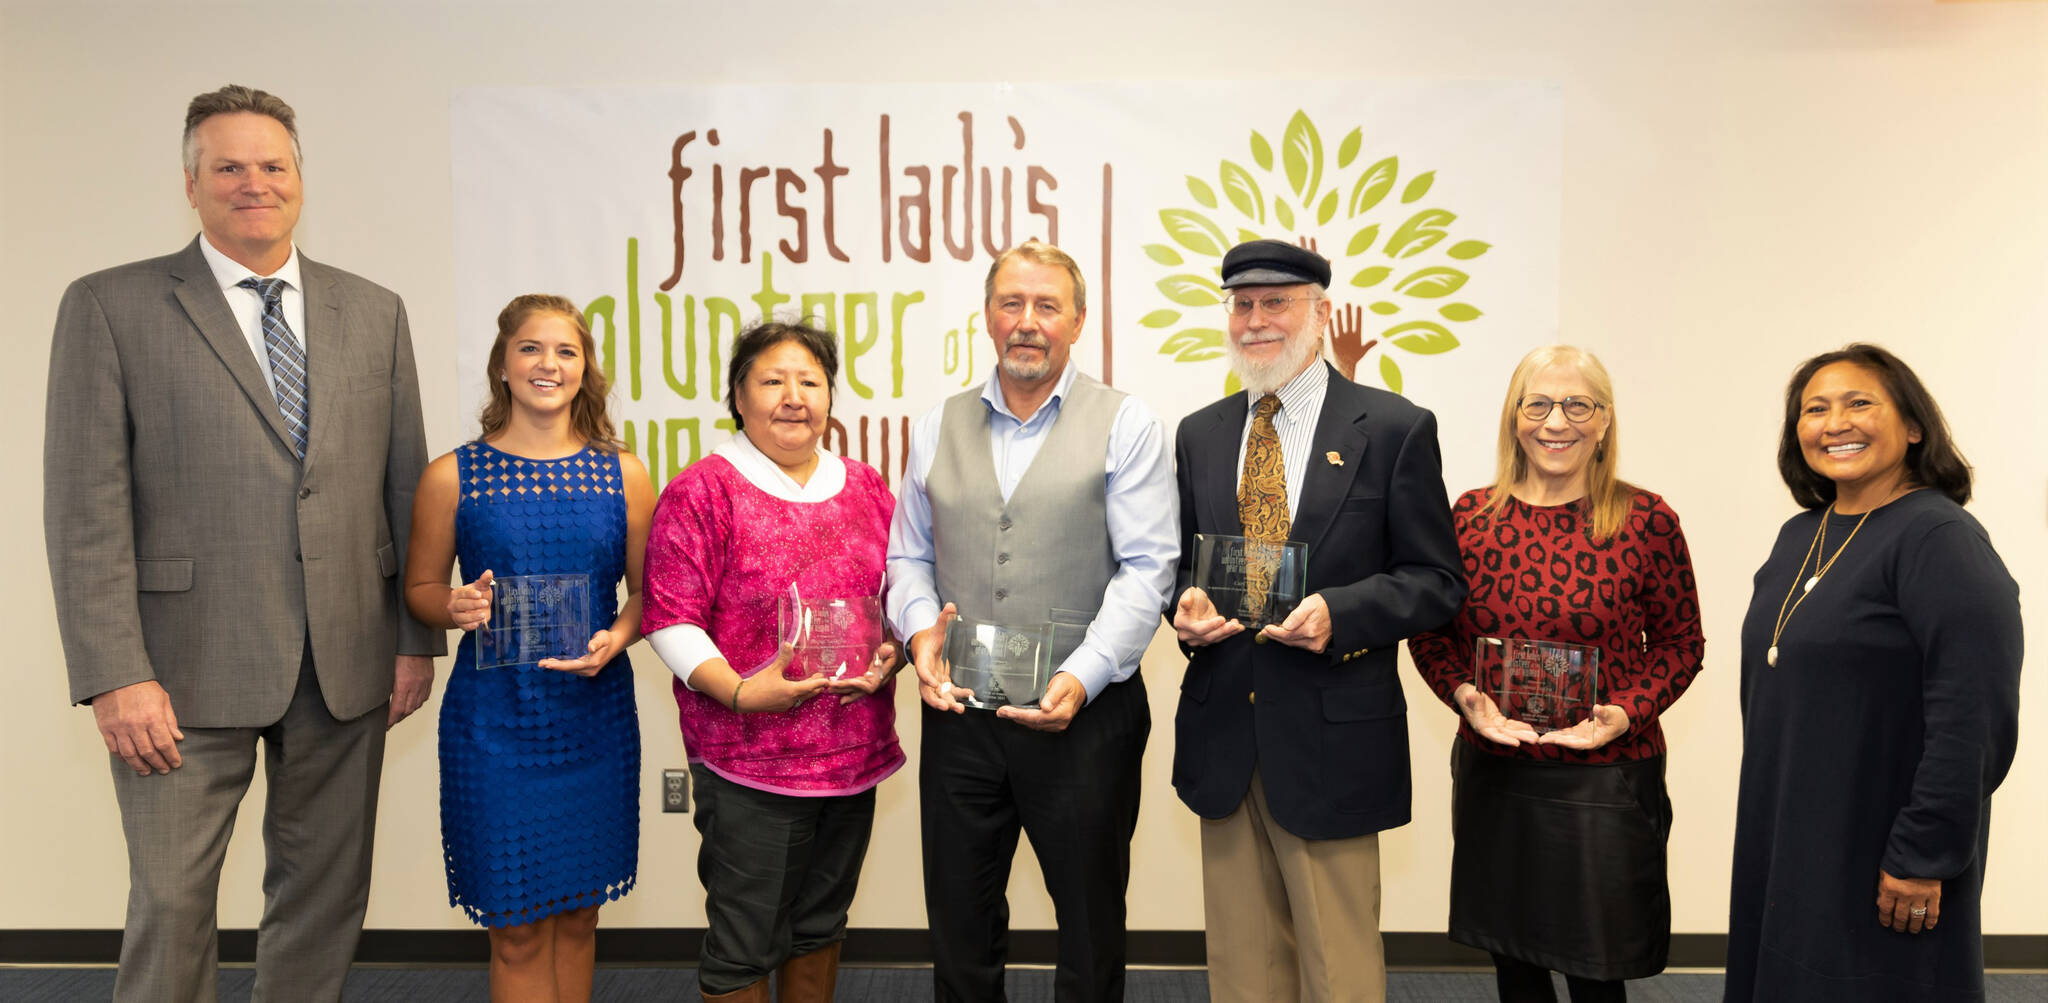 First Lady Rose Dunleavy, far right, and Gov. Mike Dunleavy, far right, pose with the 2021 Volunteer of the Year honorees. From left to right are Gov. Dunleavy, Anna DeVolld, Rachel Sallaffie, John Green, Carl Schrader, Nona Safra, and First Lady Dunleavy. (Photo by Stanley Wright)